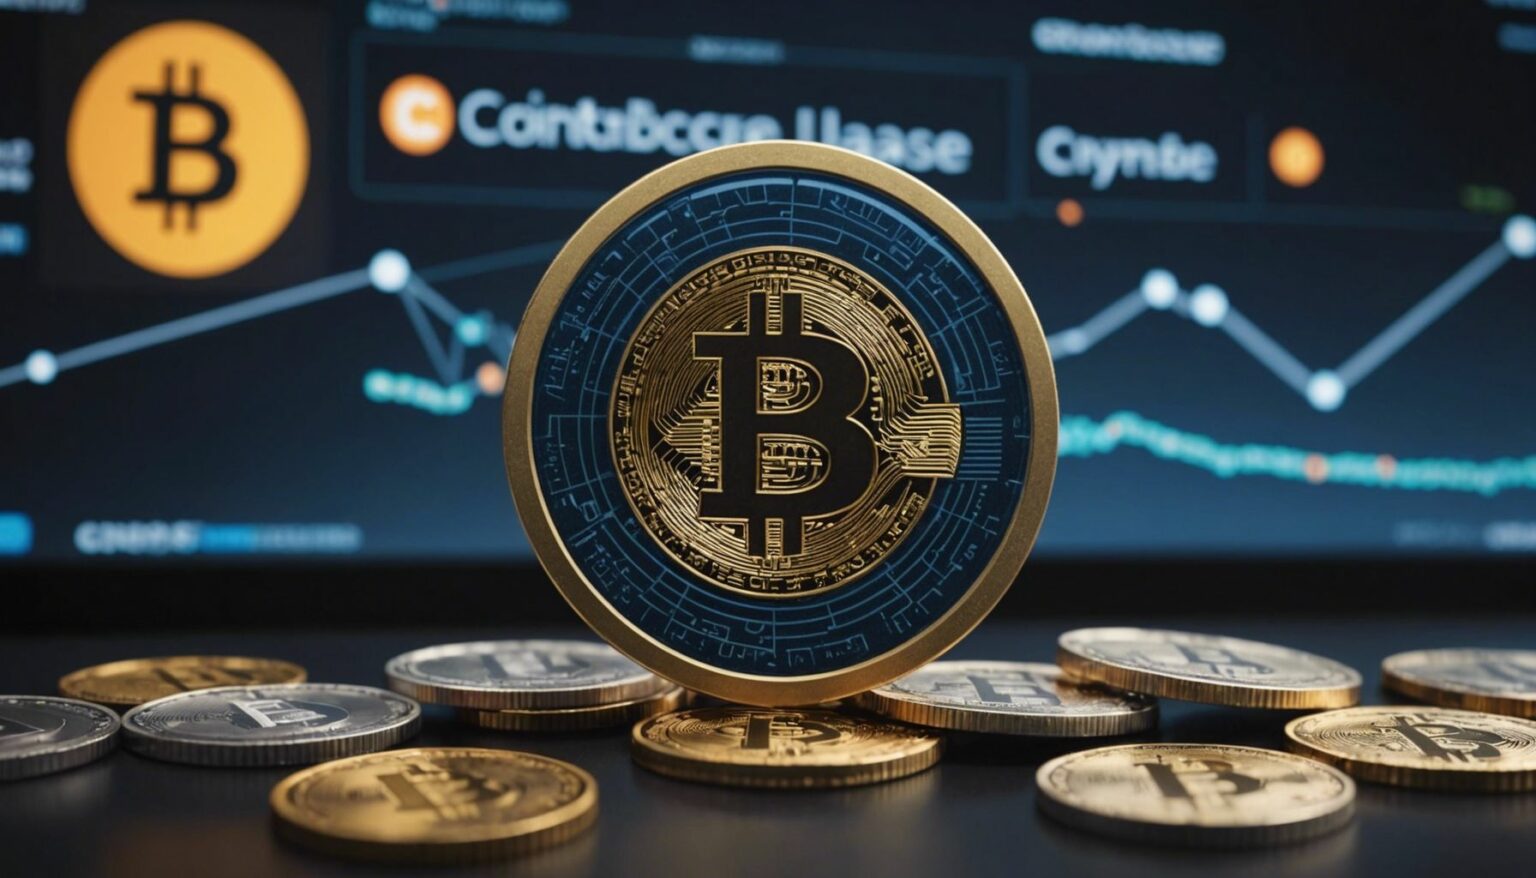 Emerging cryptocurrency exchange logos surrounding a central Coinbase logo, representing new competitors in the crypto market.